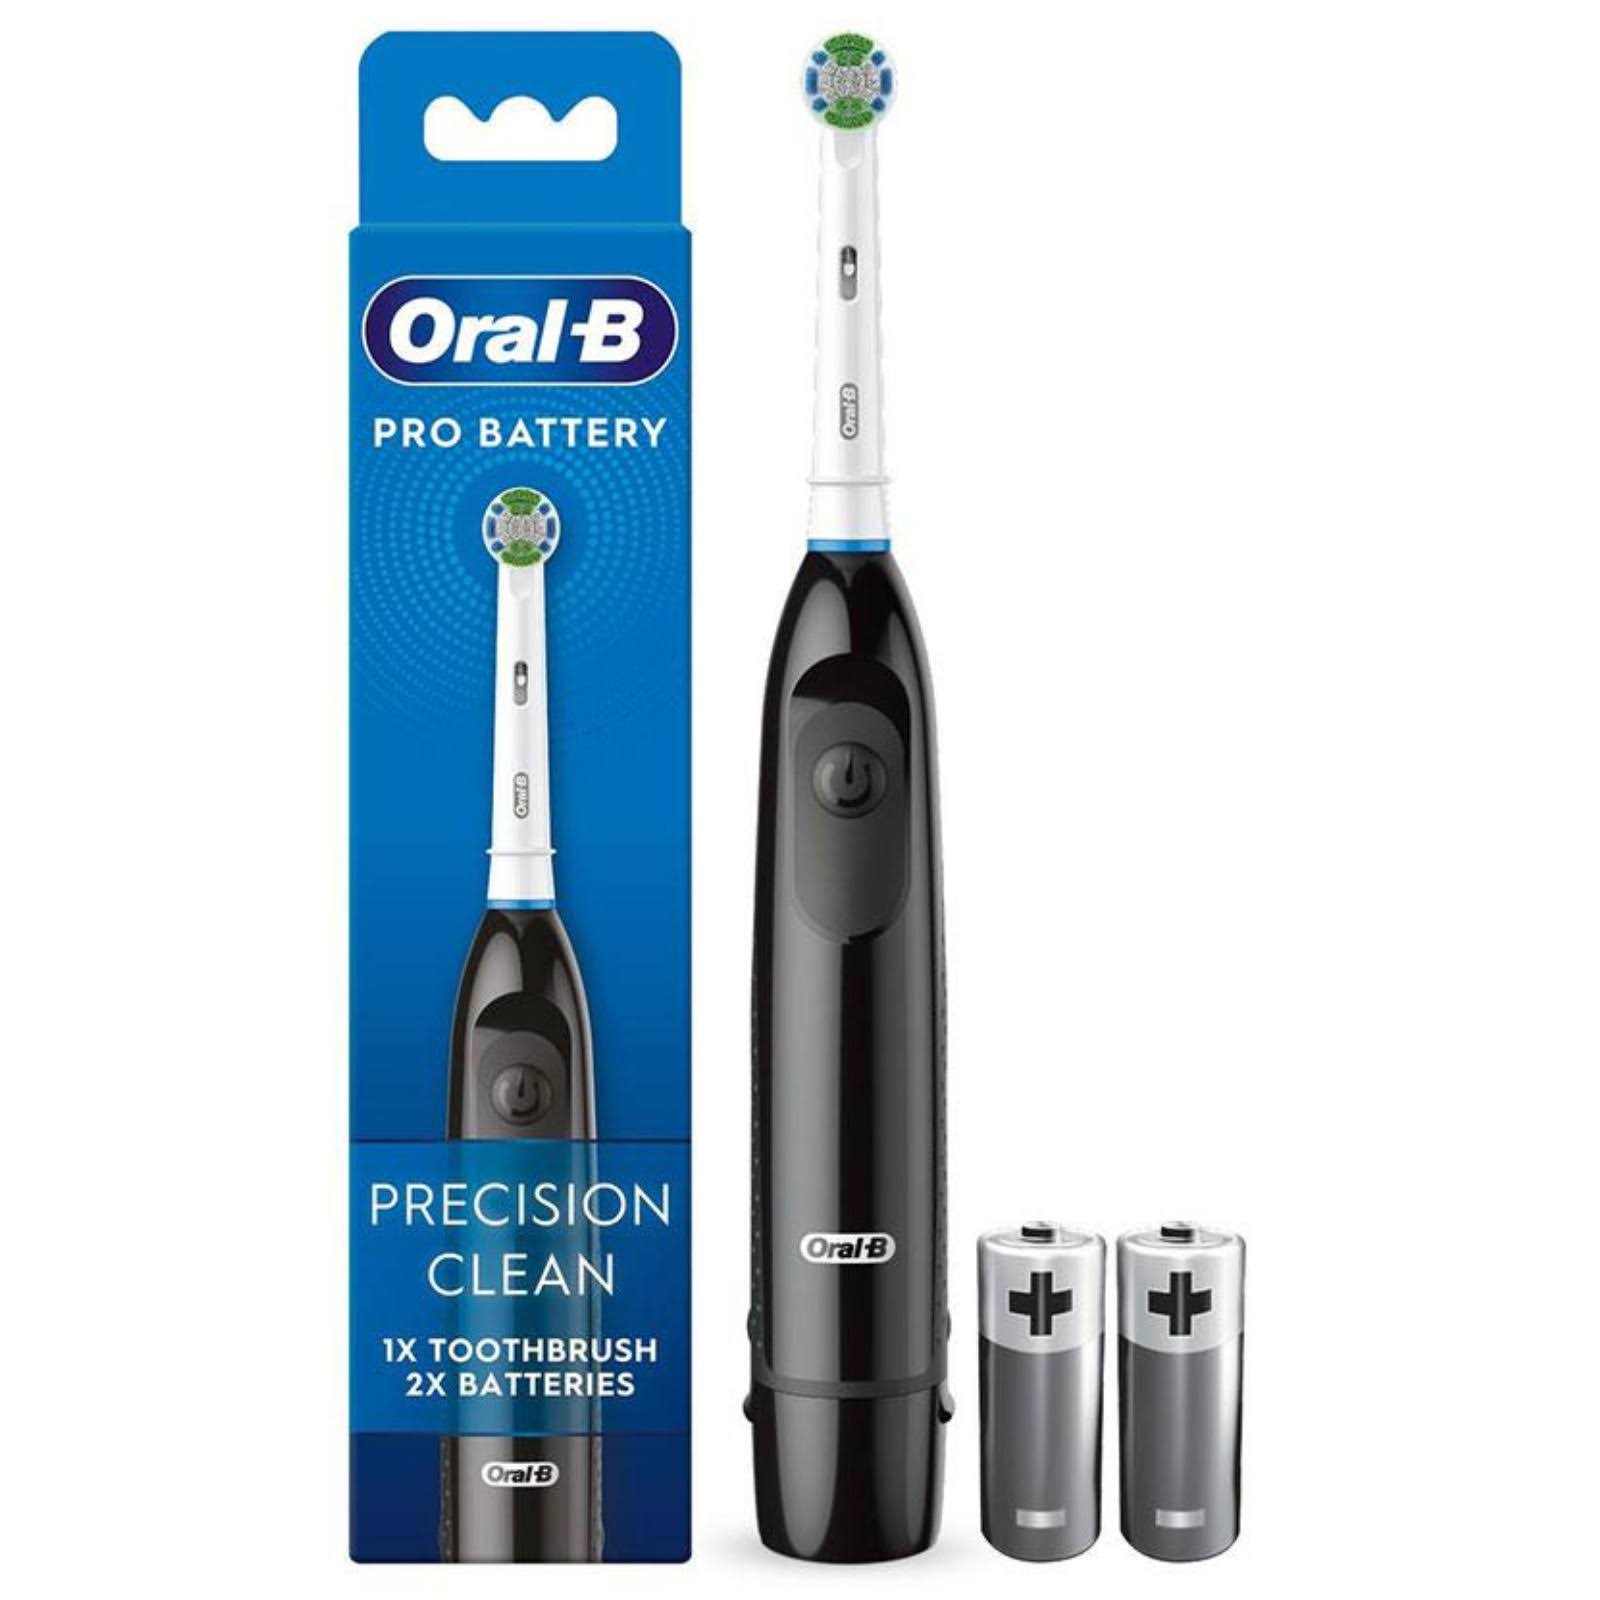 Oral B Pro Battery Precision Clean Electric Toothbrush DB5 White